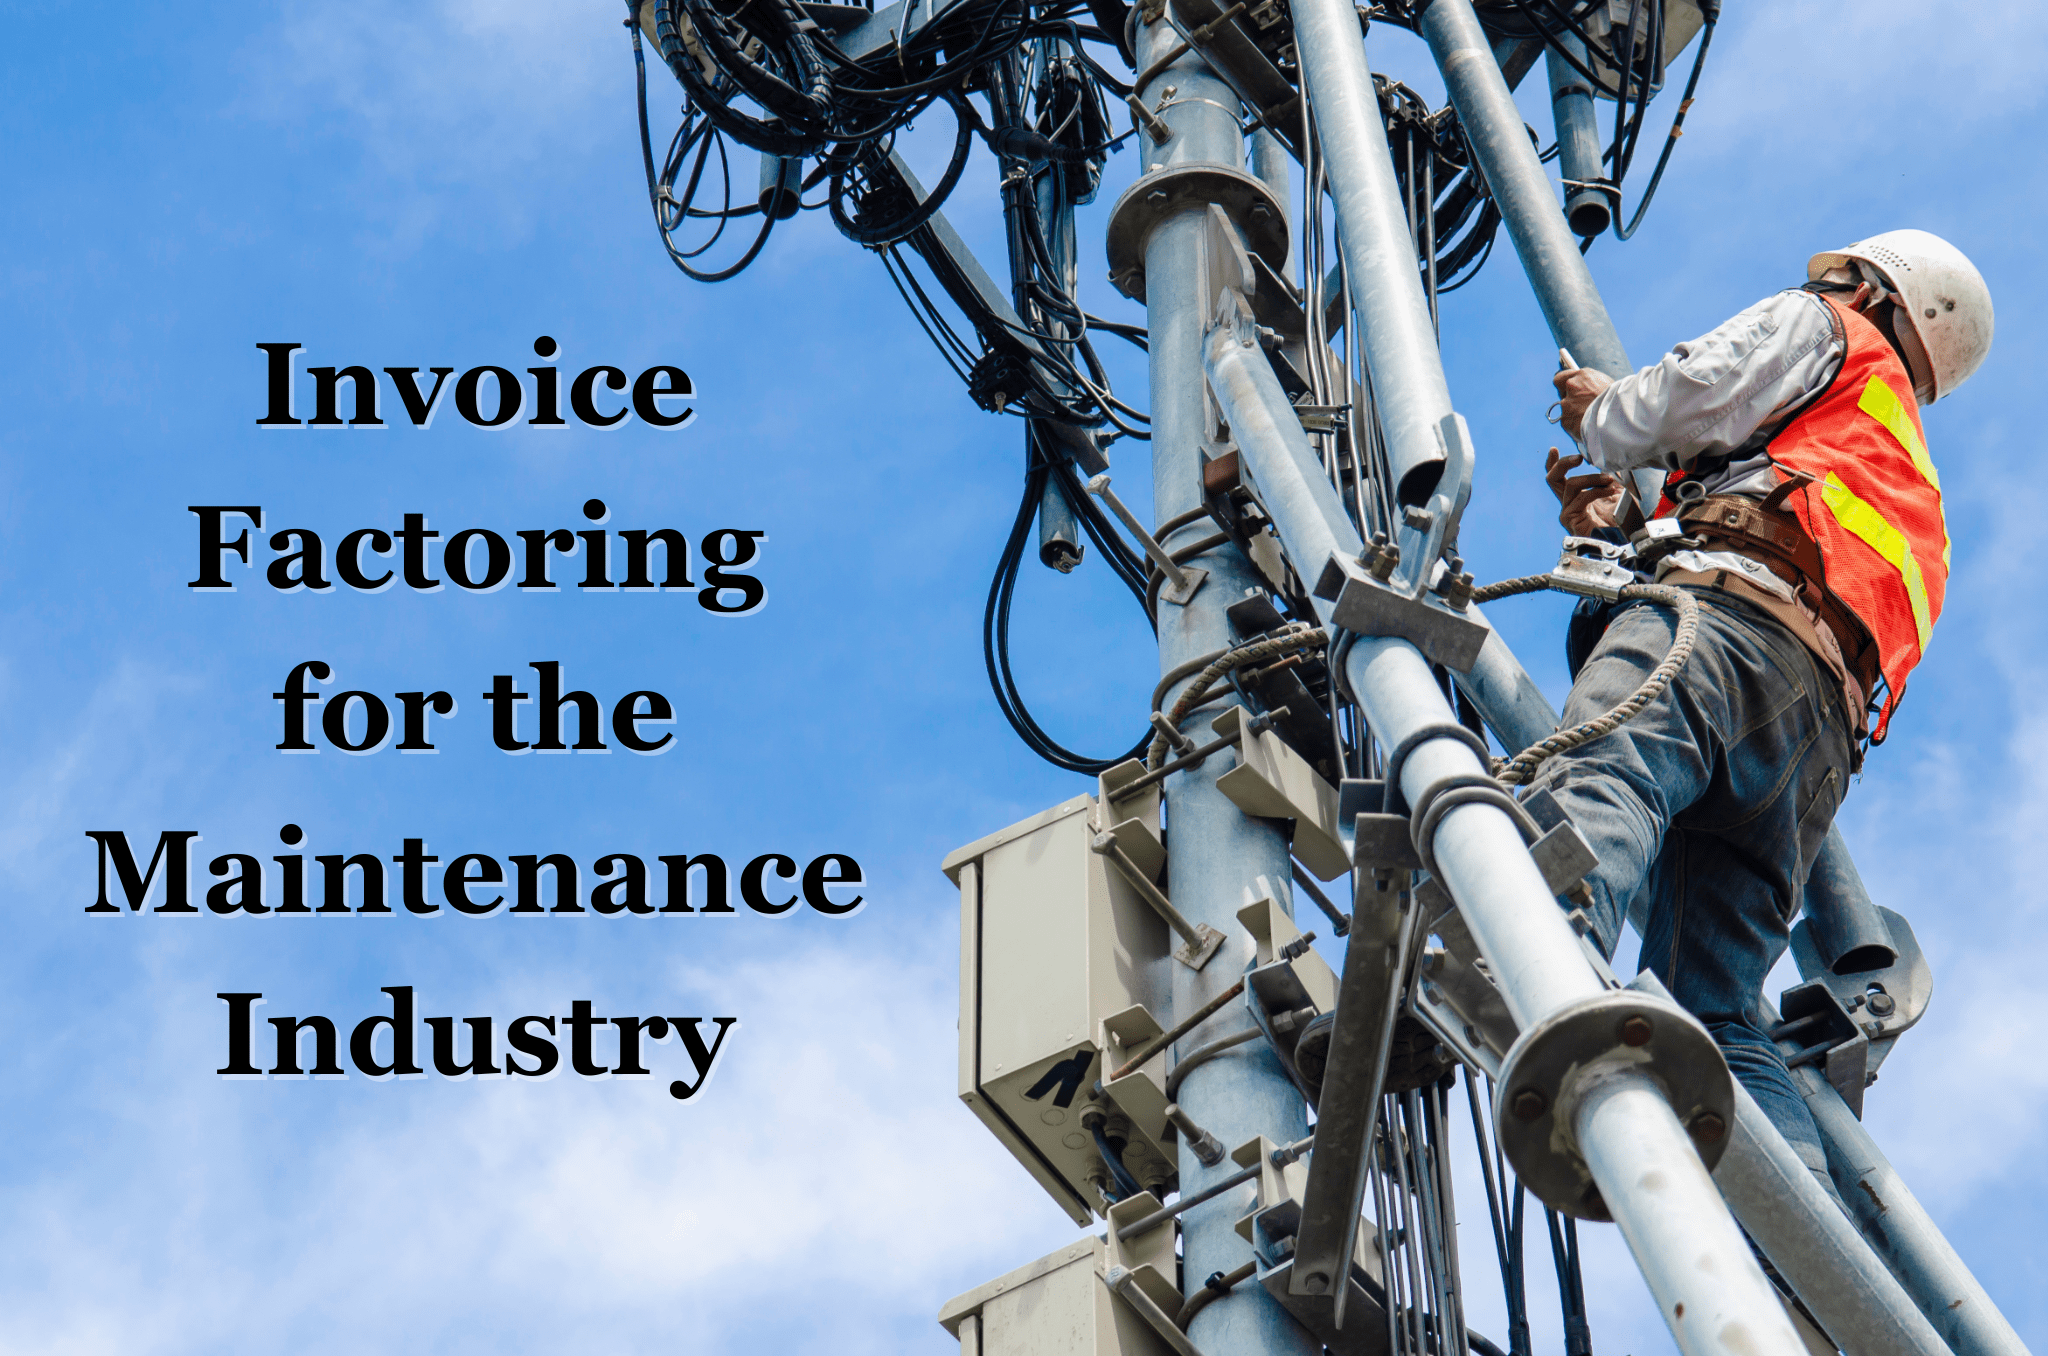 Invoice Factoring for the Maintenance Industry